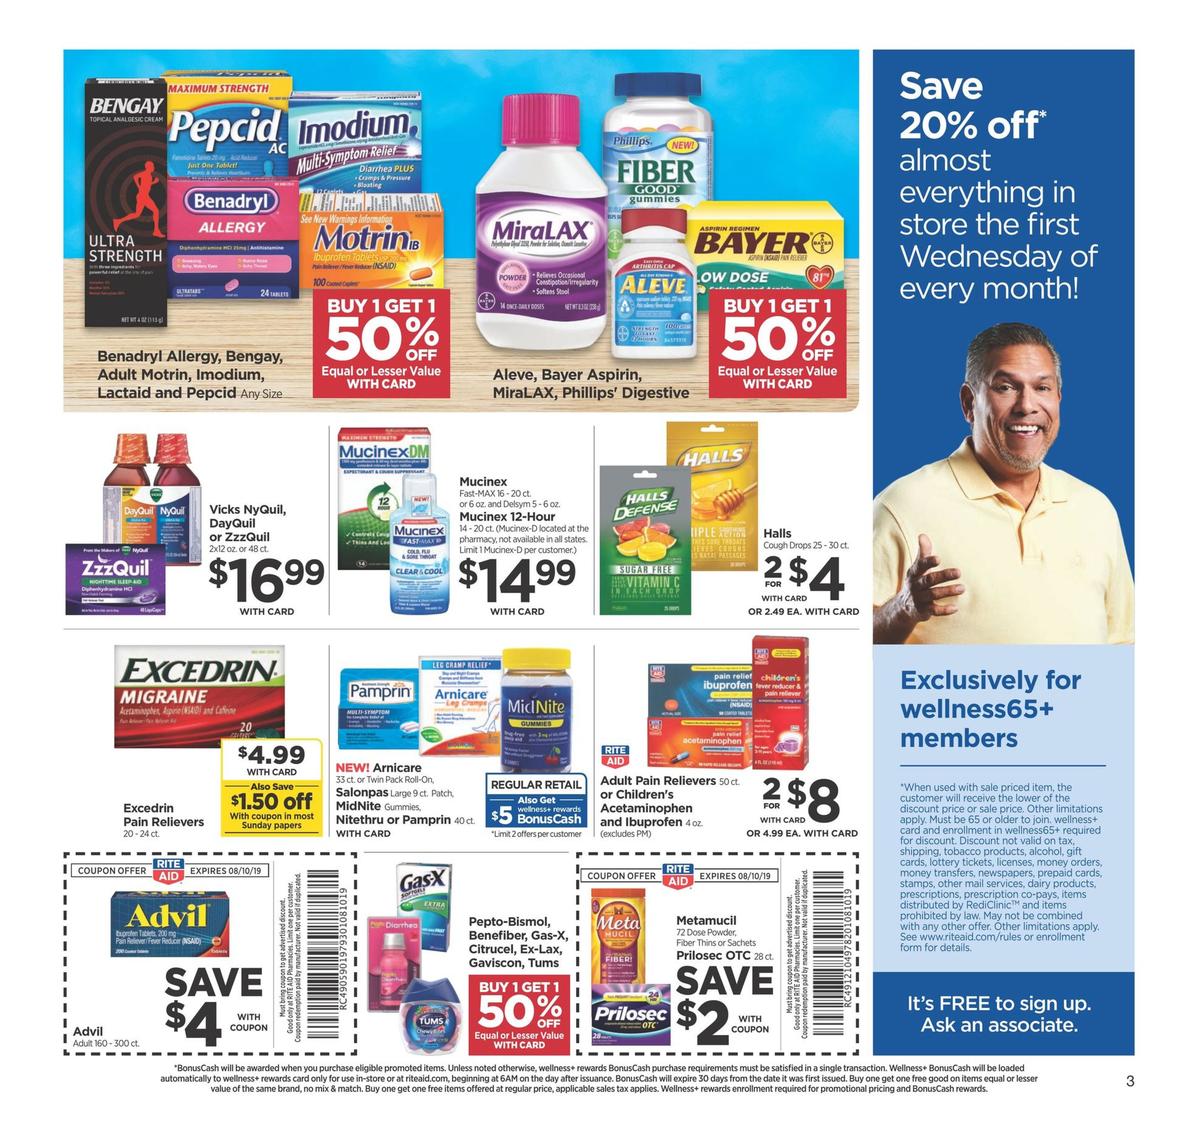 Rite Aid Weekly Ad from August 4